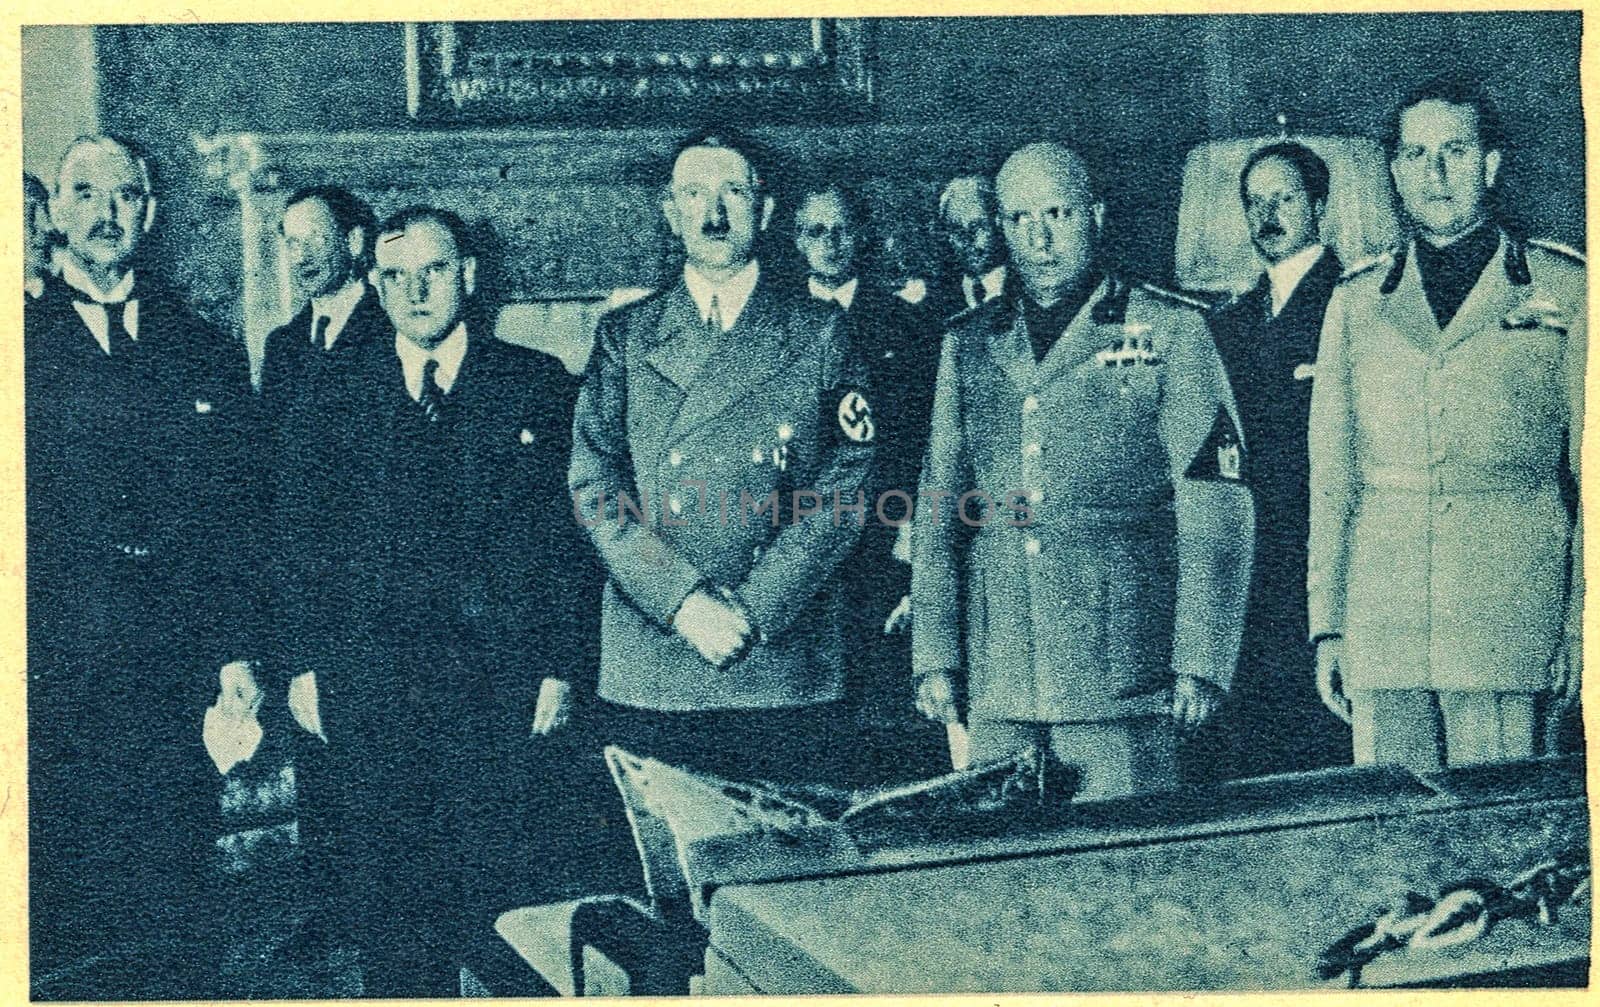 MUNICH, GERMANY - SEPTEMBER 29, 1938: Munich agreement - Czechoslovakia has ceased to exist. From left - Neville Chamberlain, Great Britain douard Daladier, France Adolf Hitler, Nazi Germany and Benito Mussolini , fascistic Italy.